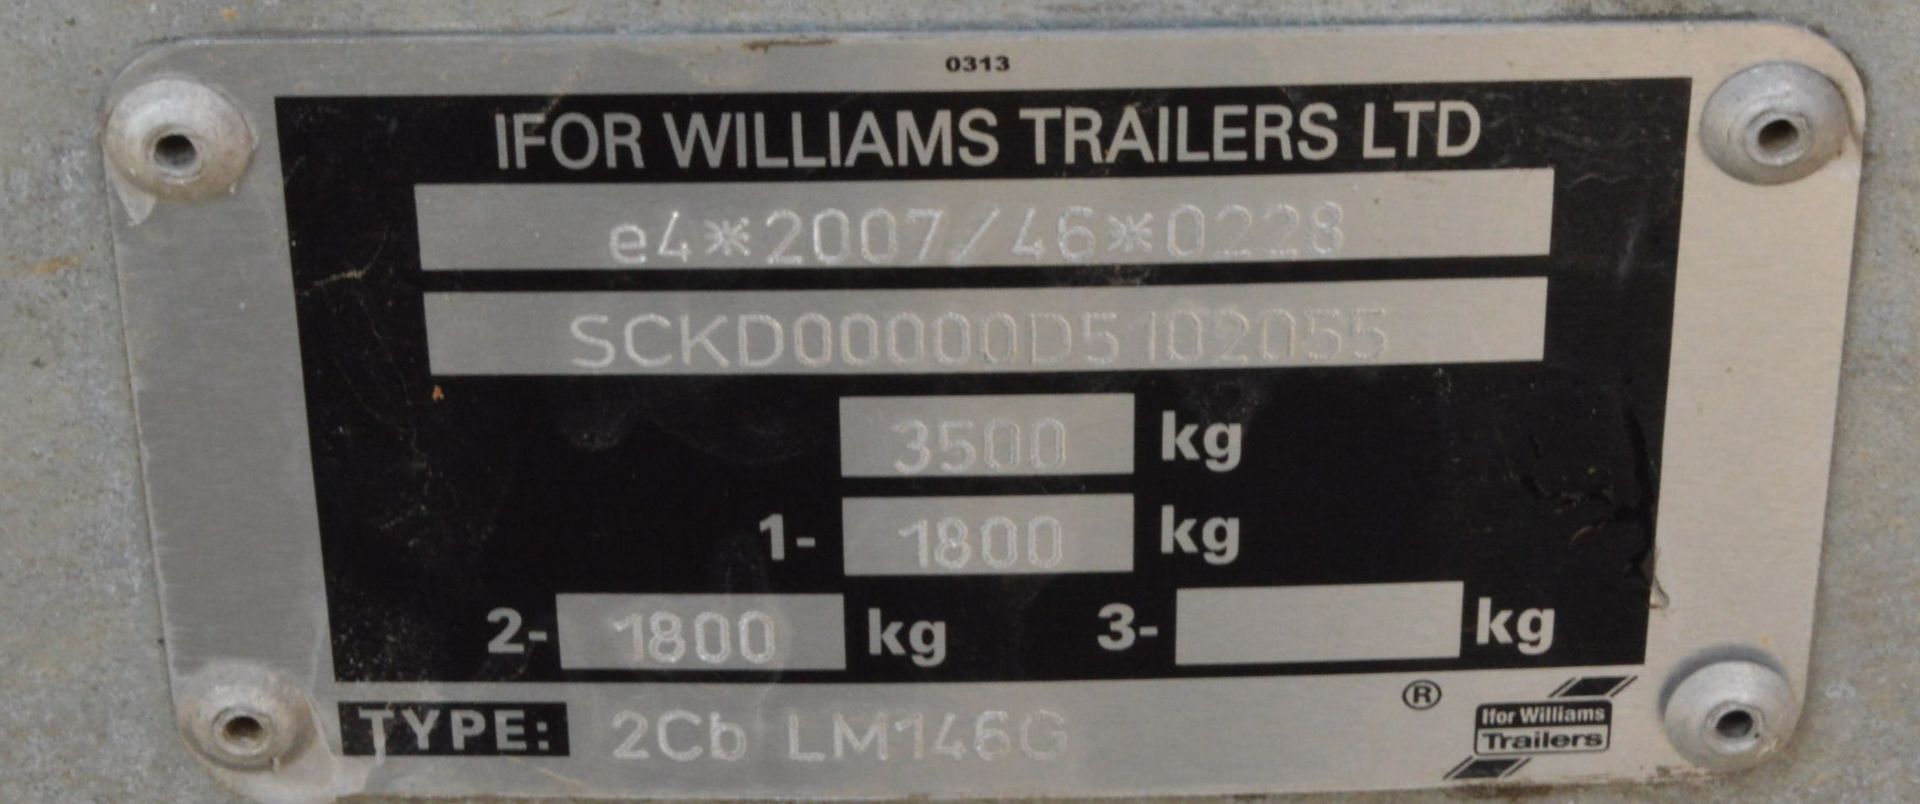 Ifor Williams 2CBLM146G TWIN AXLE DROP SIDE TRAILER, serial no. SCKD00000D5102055, - Image 5 of 5